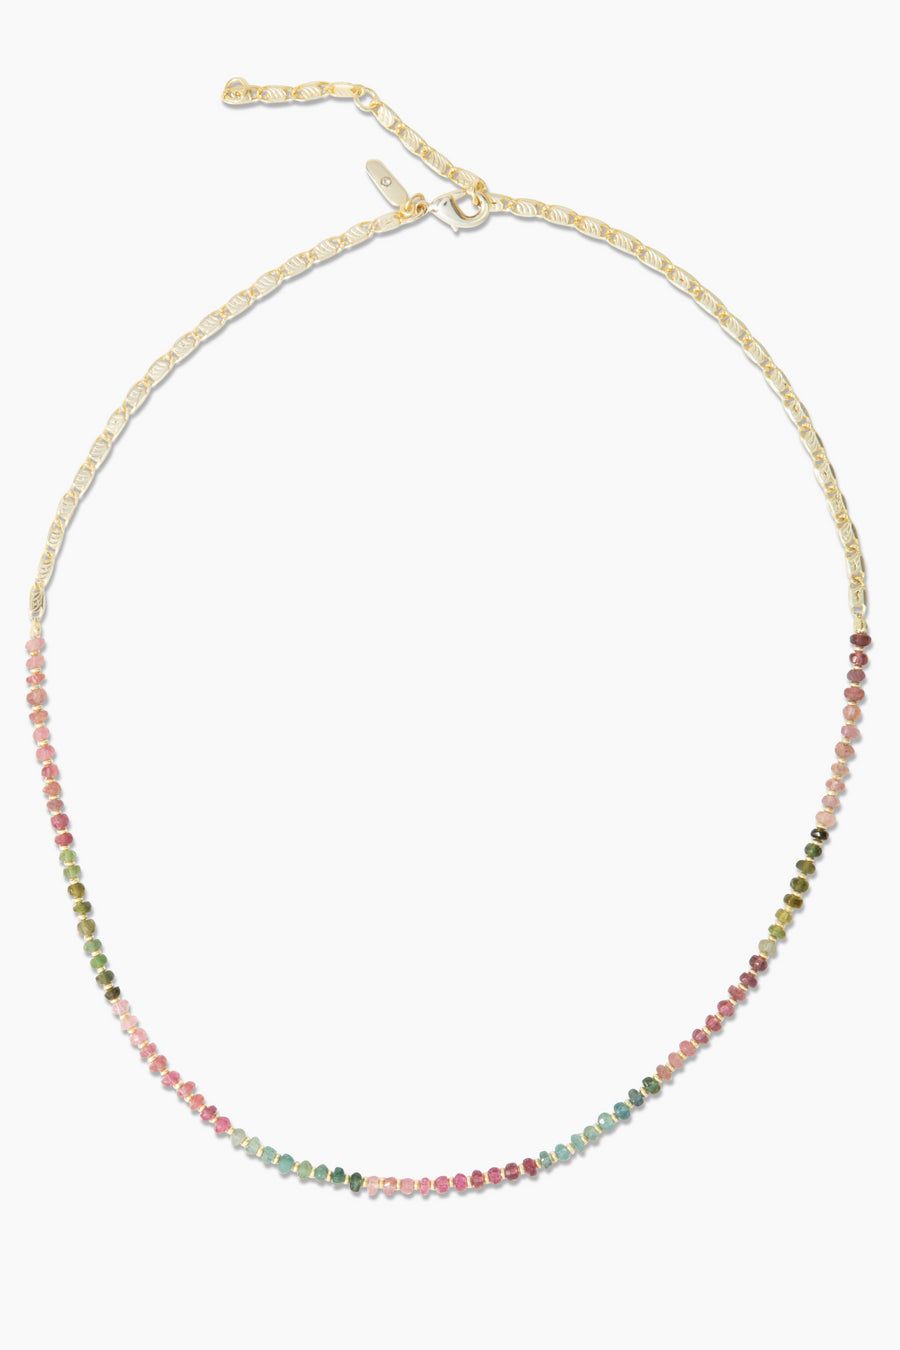 Kimberly Beaded and Gold Necklace | Stella & Dot